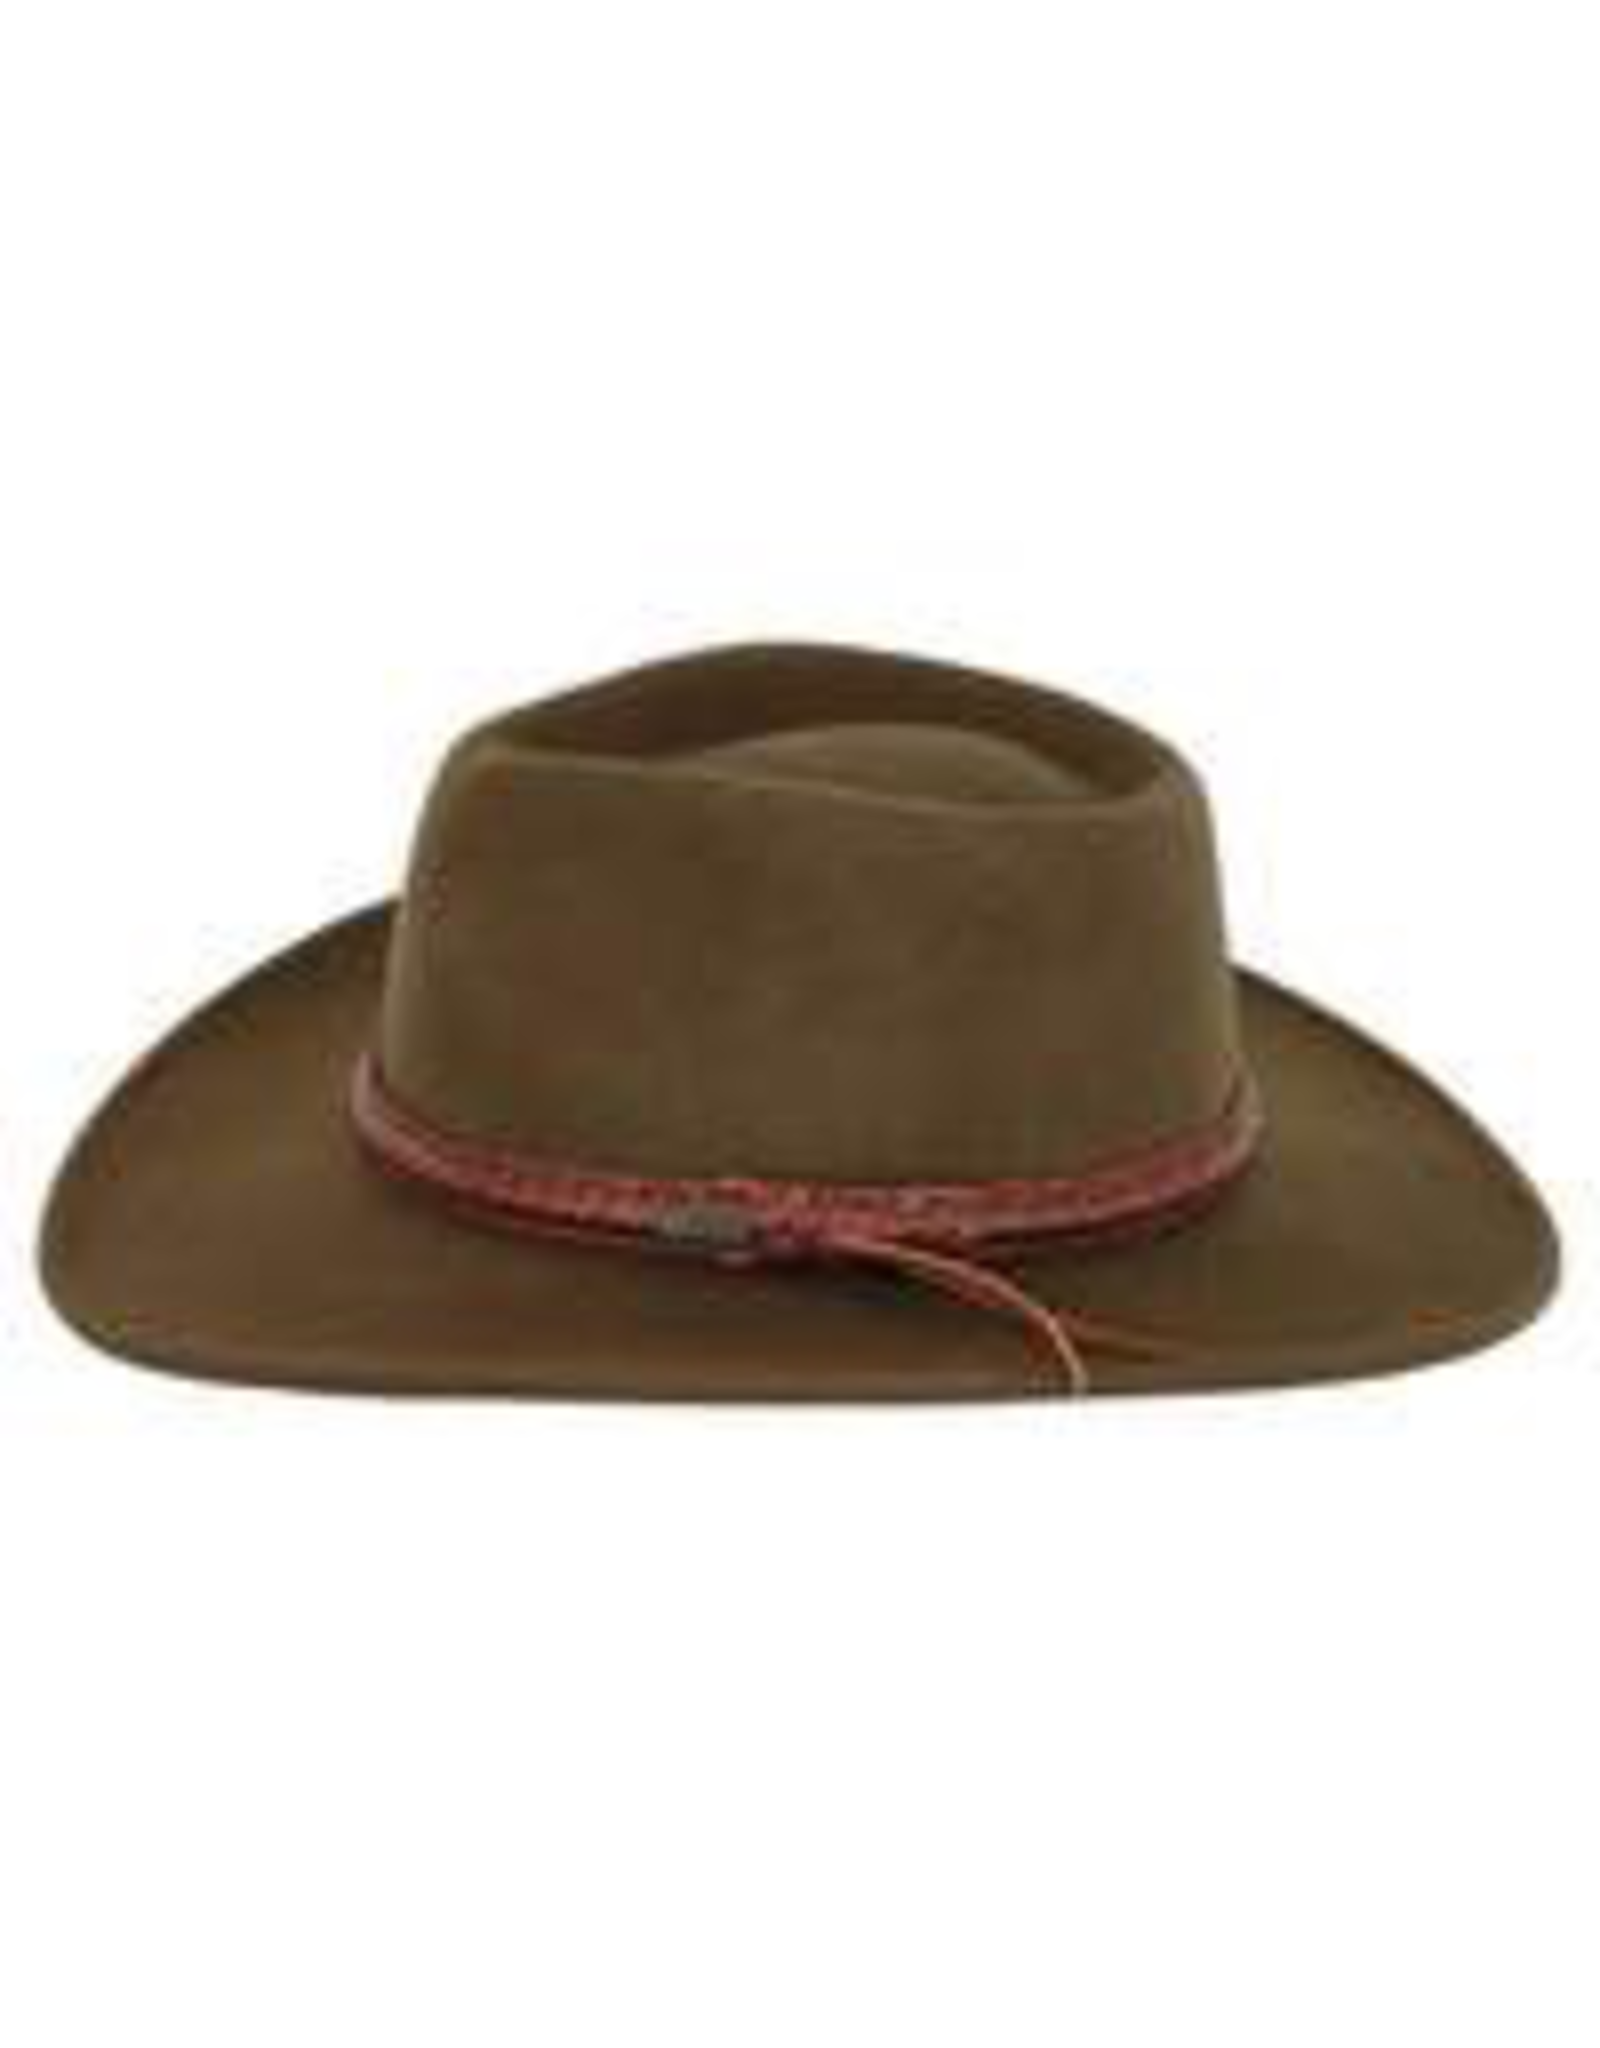 Hats OUTBACK Dusty Rider No.1379